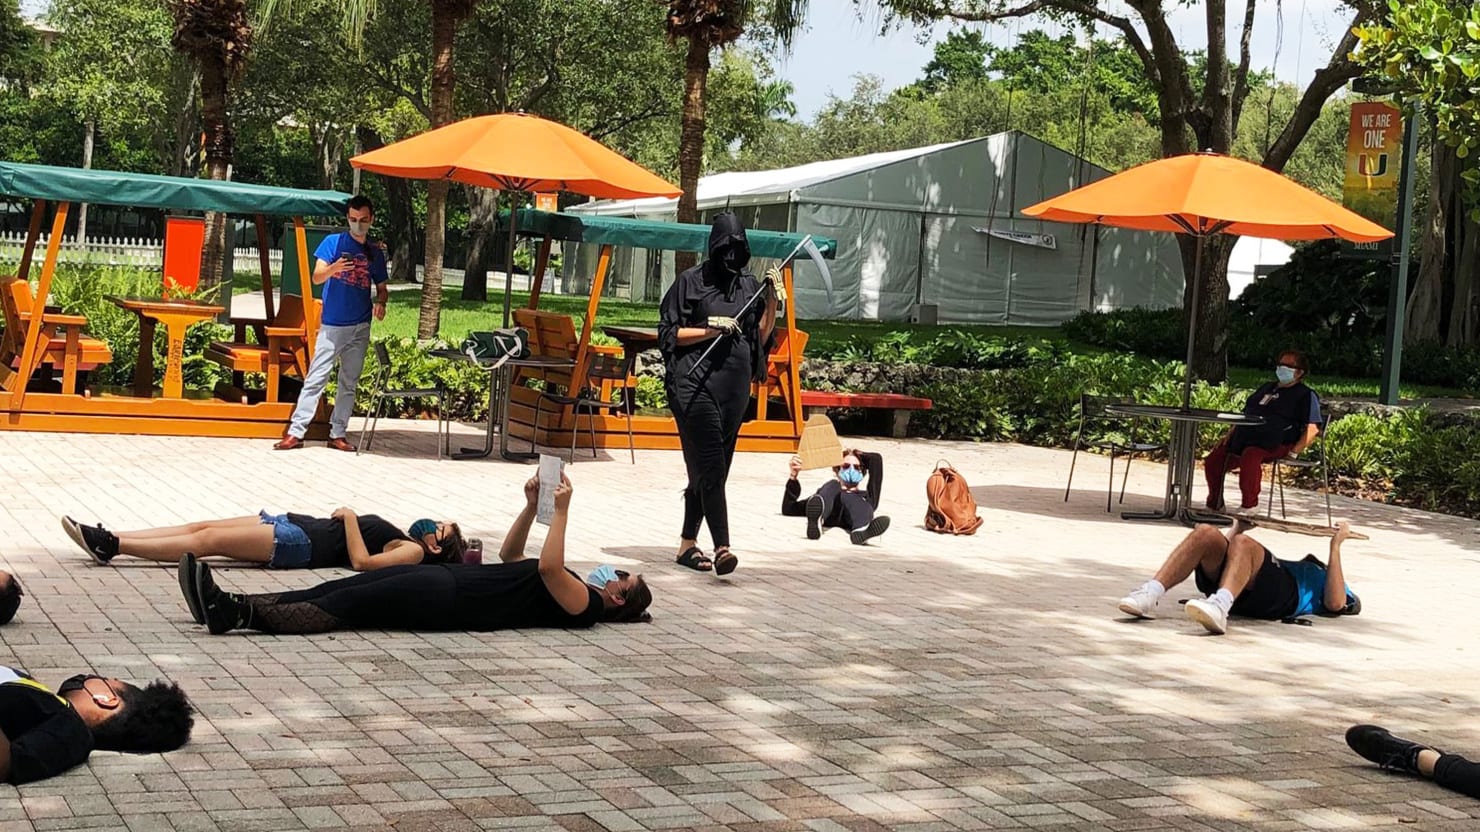 How Masked COVID-19 Protesters at the University of Miami Obtained Outed by Their College